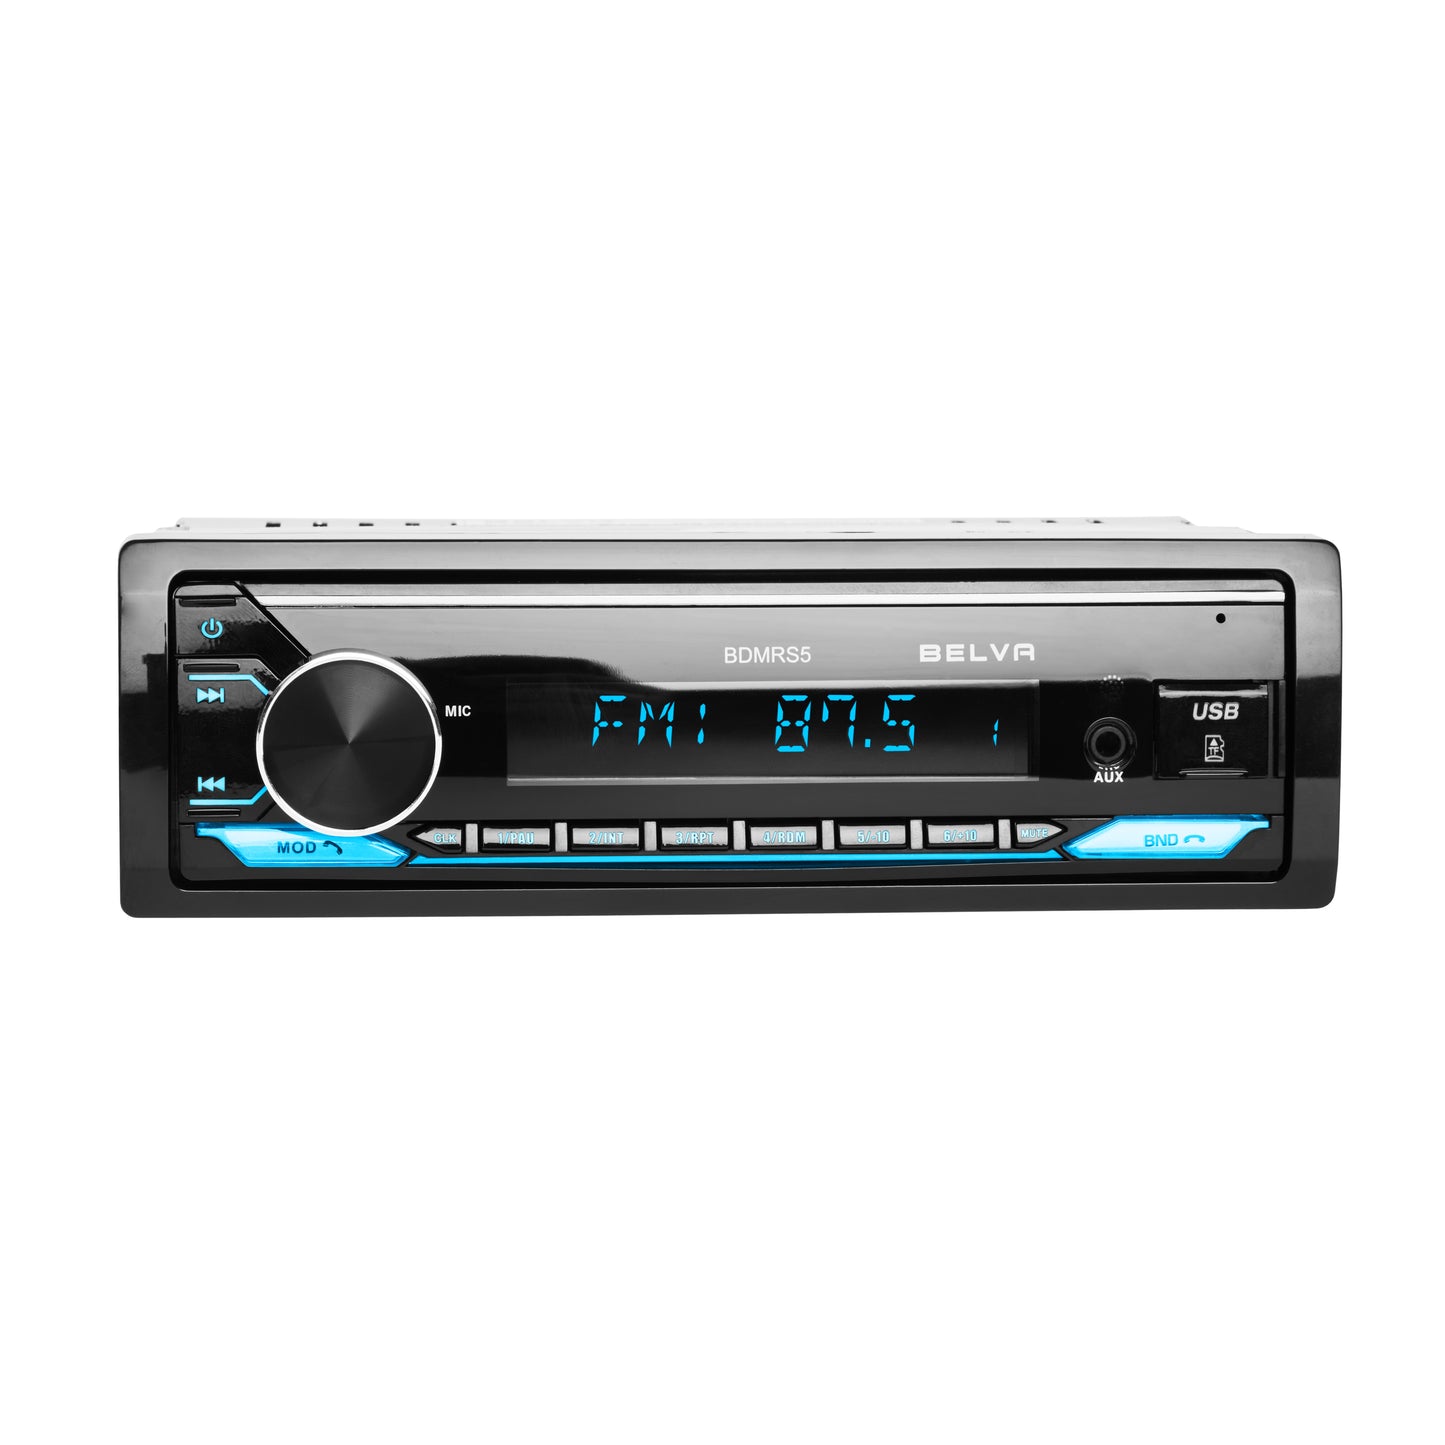 BDMRS5 | Single DIN Bluetooth In-Dash Car Stereo Receiver with Front SD, USB, AUX Input and 5 Volt Preamp Outputs